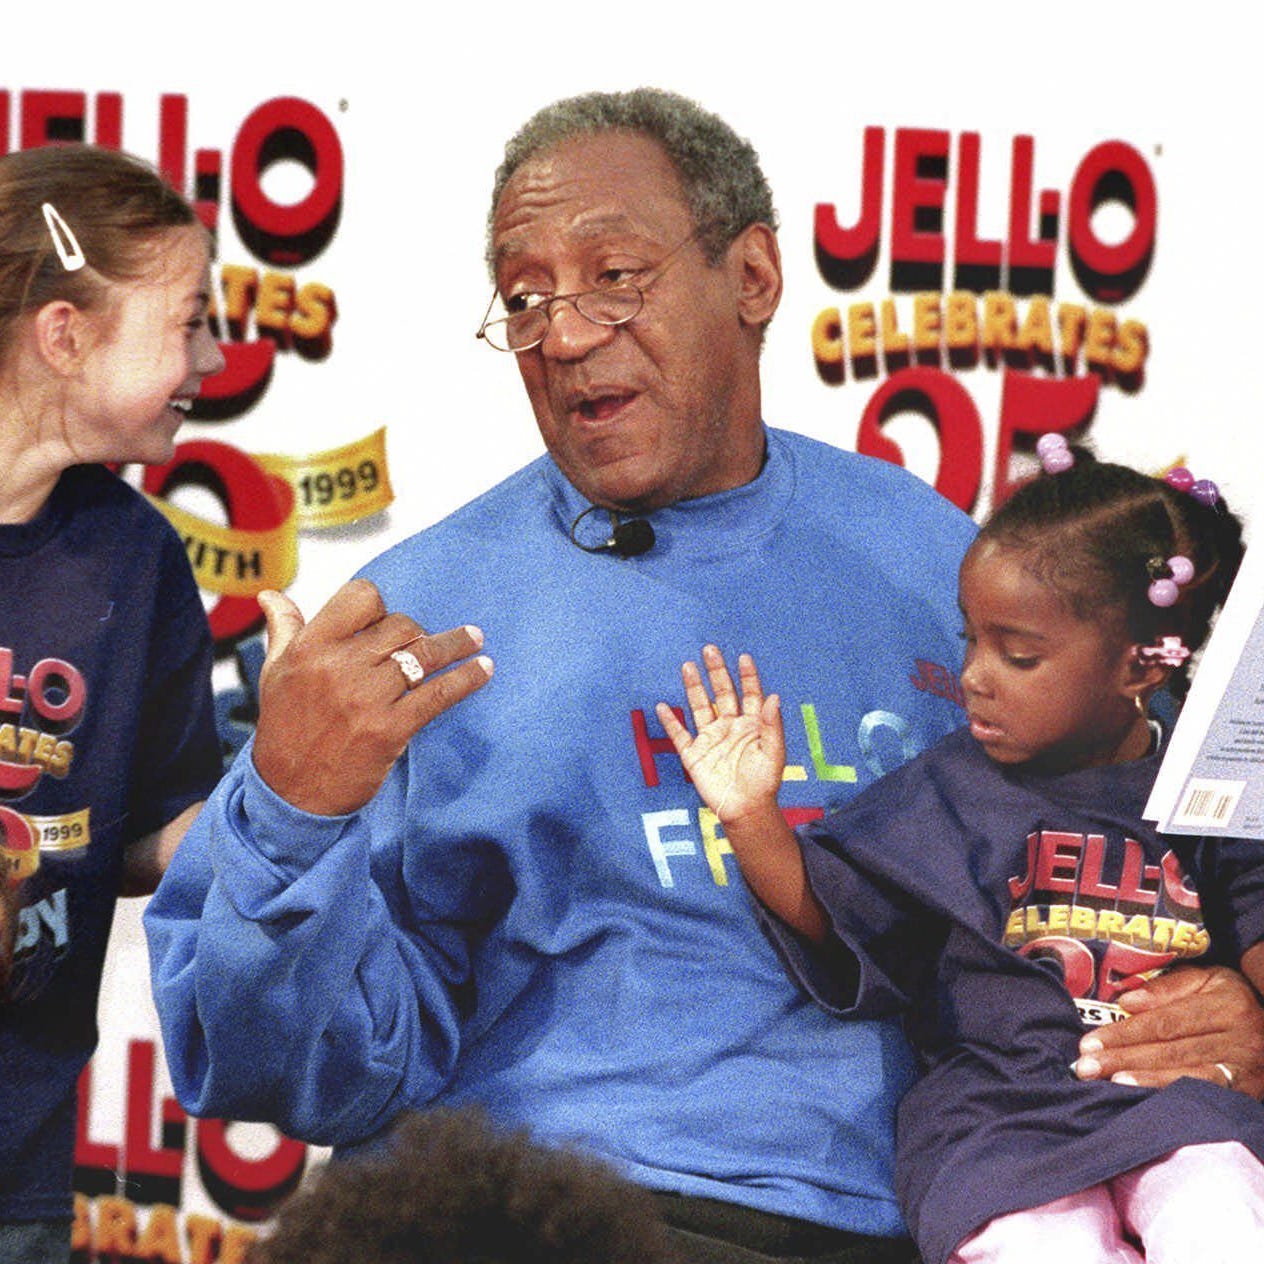 Bill Cosby, marking 25 years as pitchman for Jell-O desserts and a donation of children's books from his 